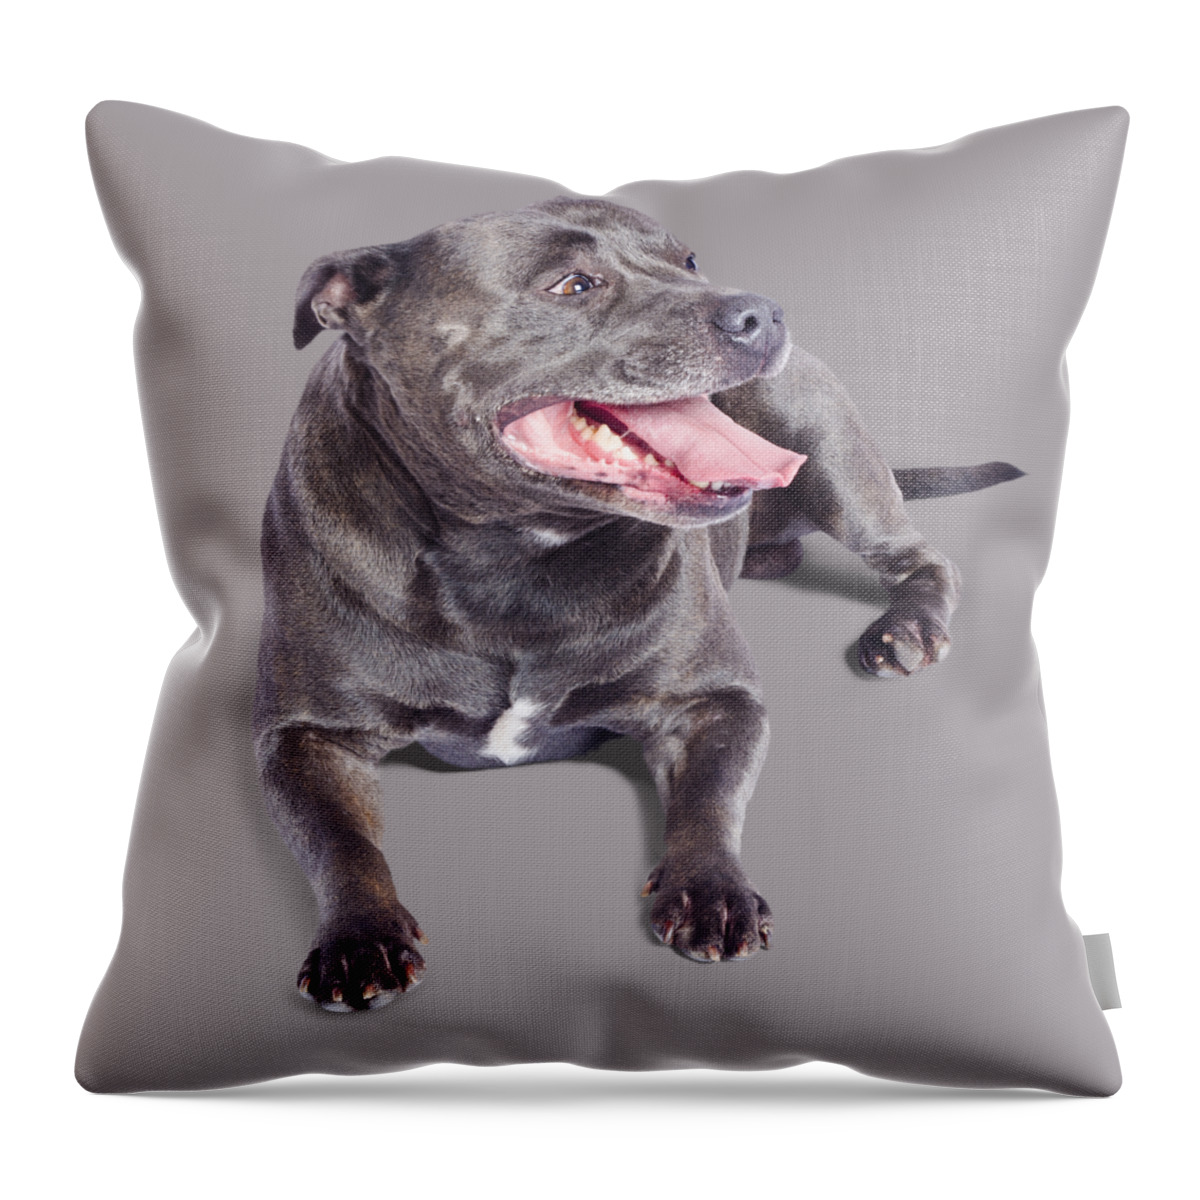 Staffordshire Throw Pillow featuring the photograph Pet Staffordshire Terrier dog by Jorgo Photography